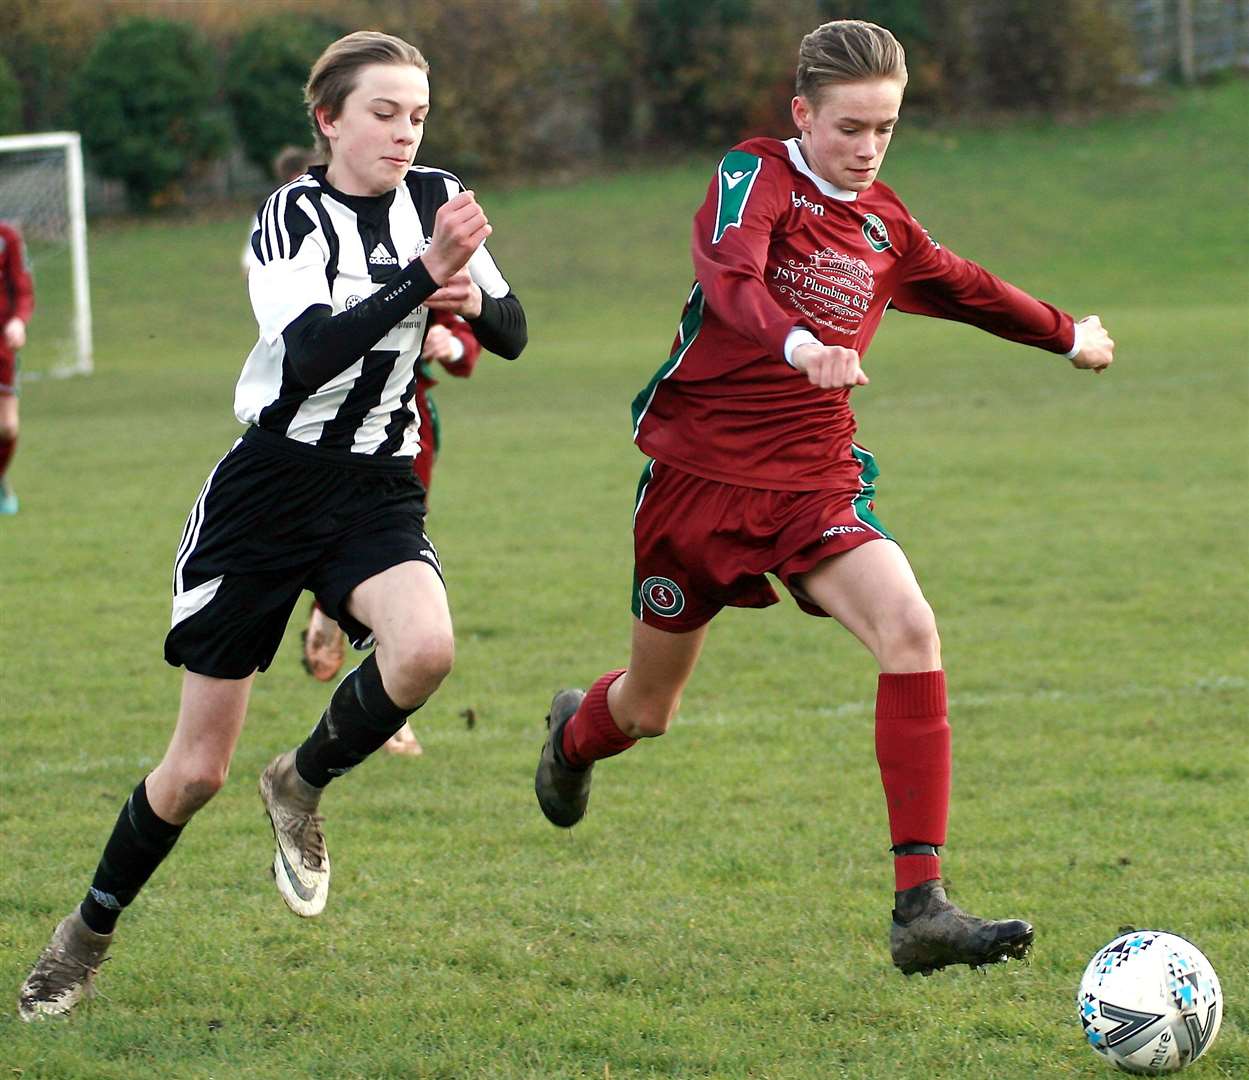 Cobham Colts under-14s (claret) and Real 60 under-14s give chase. Picture: Phil Lee FM22430397